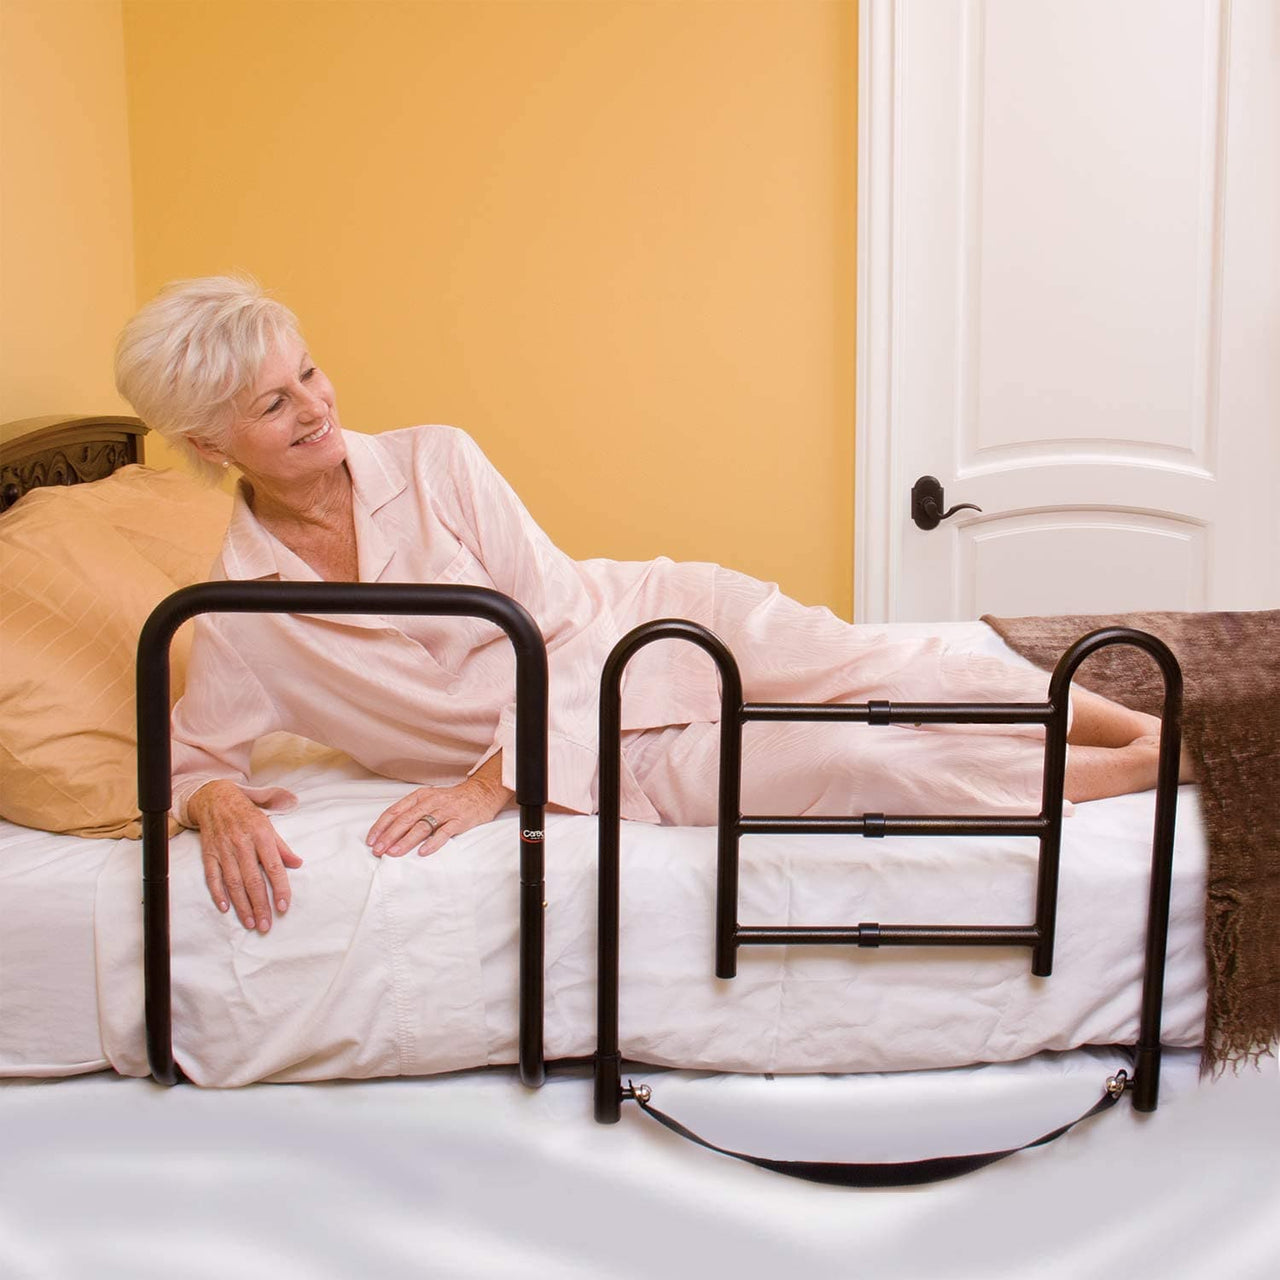 Carex Easy-Up Bed Safety Rails  - Combination Fall Prevention Safety Rails - Senior.com Bed Rails